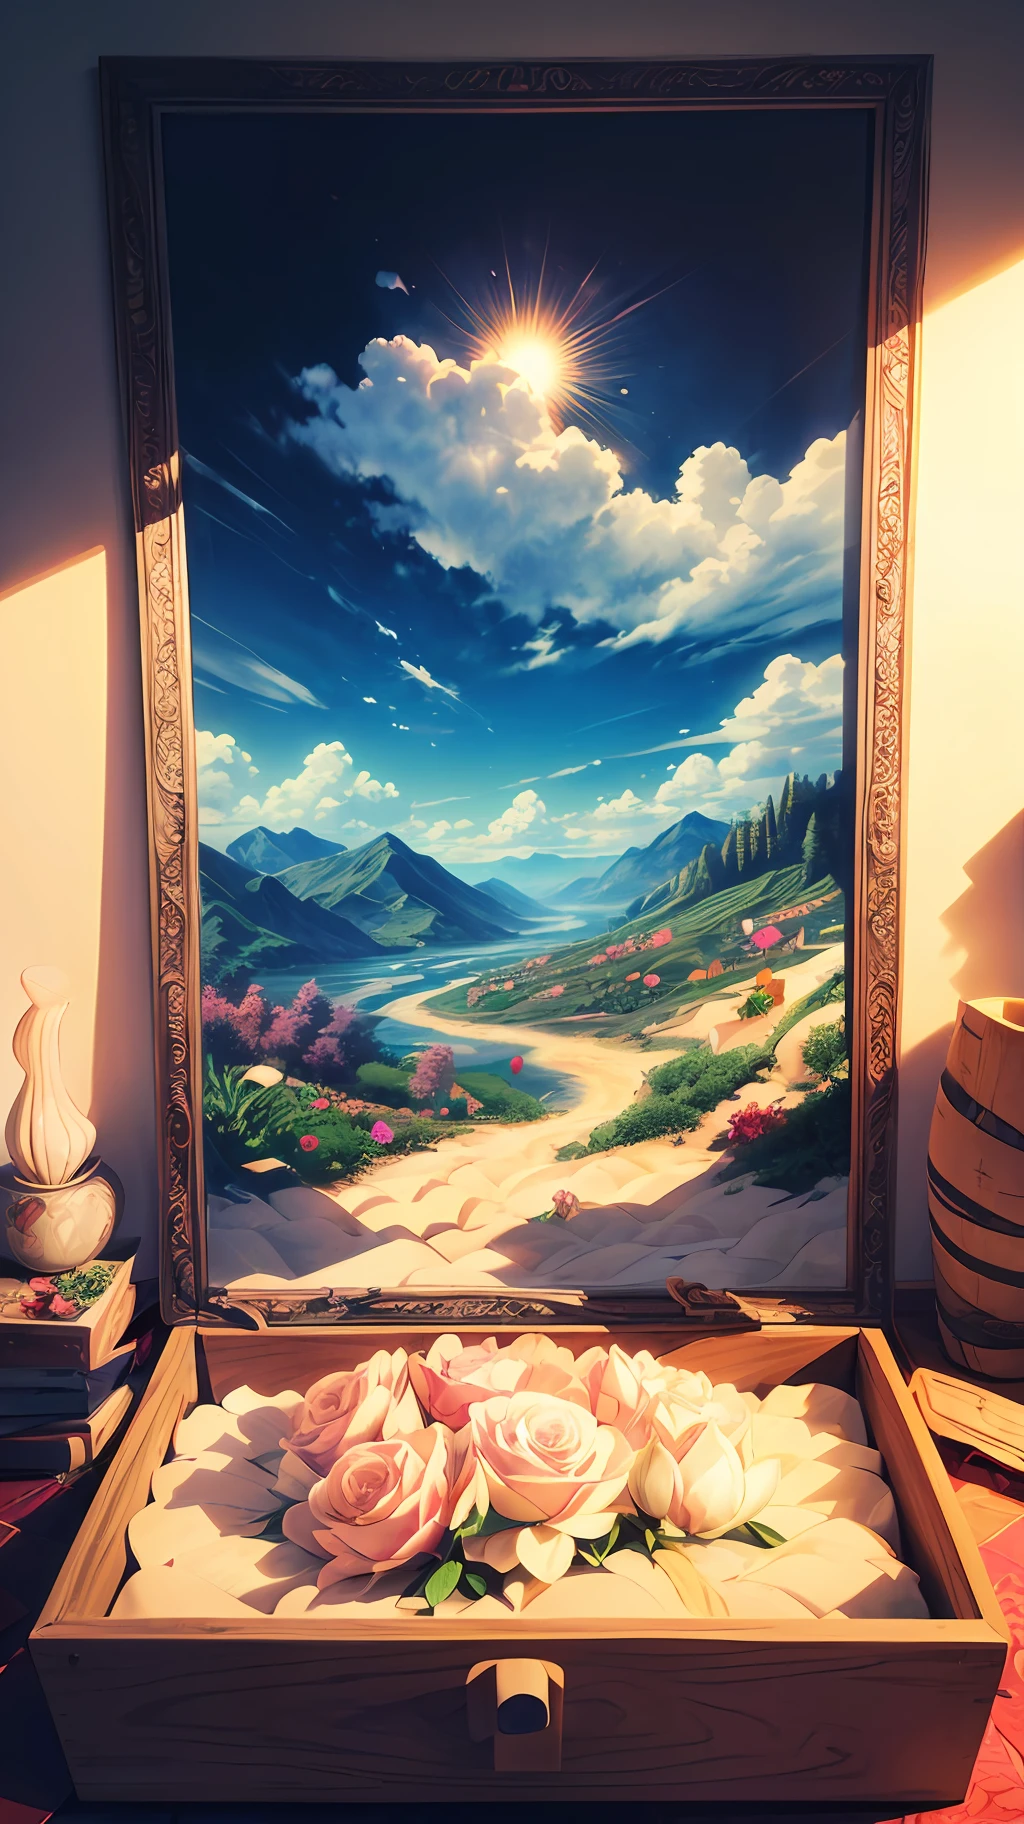 (sandbox:1.4),Movie Angle,(Sun, White clouds, Mountains, ln the forest, rivers),(paper art,Quilted paper art,geomerty),(Extremely colorful, Best quality, Detailed details, Masterpiece, offcial art, movie light effect, 4K, Chiaroscuro)，Rose roses，Peach blossoms，Peonies，Tulip tuli，